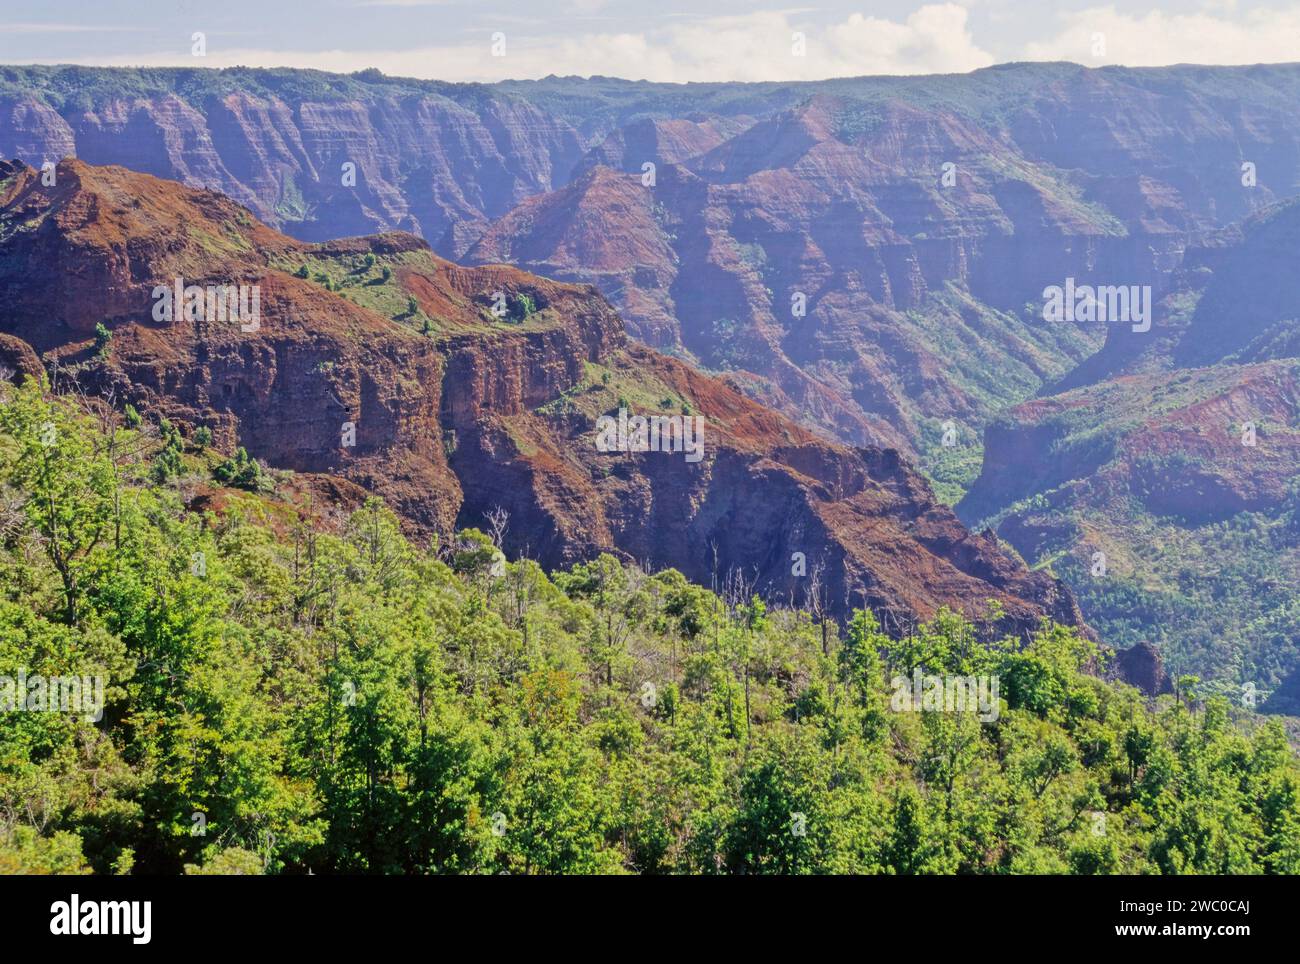 Waimea Canyon, also known as the Grand Canyon of the Pacific, is a large canyon, approximately ten miles (16 km) long and up to 3,000 feet (900 m) dee Stock Photo